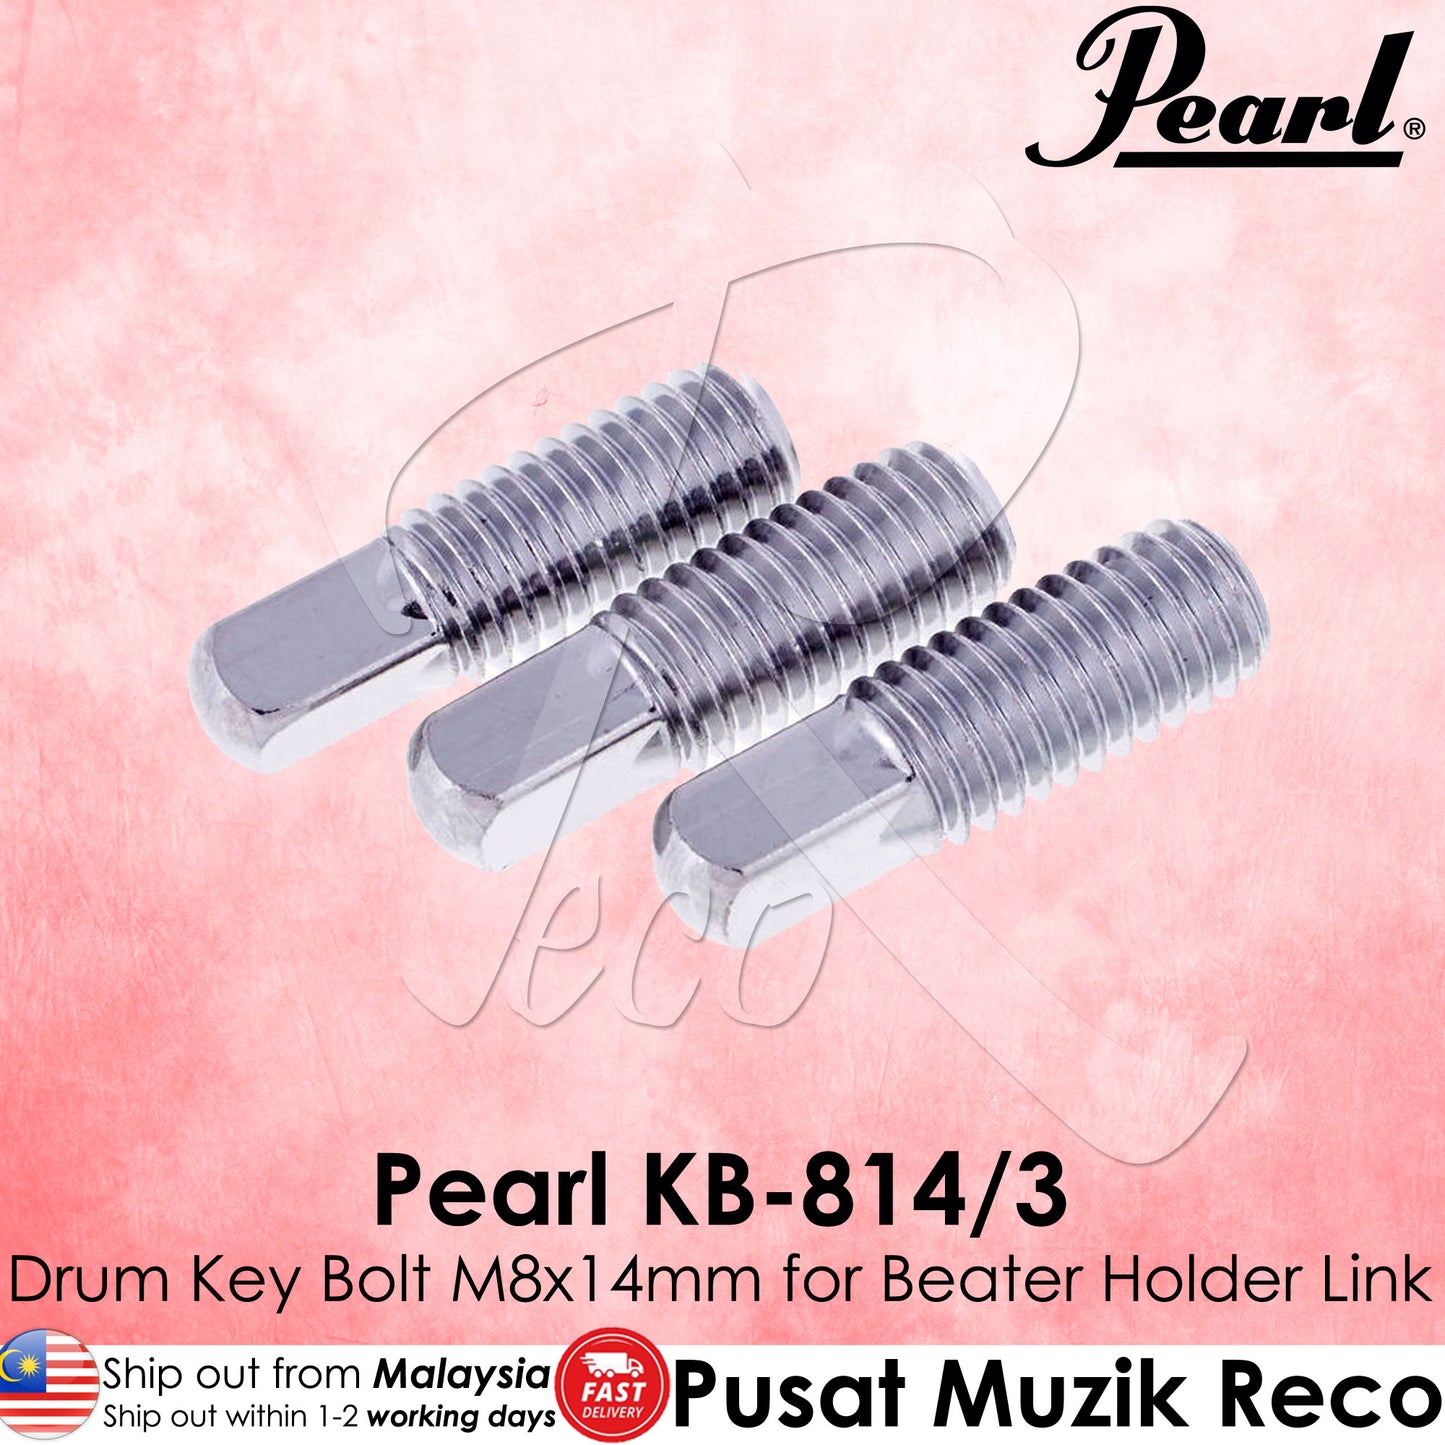 Pearl KB-814/3 3 Pack Of Drum Key Bolt M8x14mm For Beater Holder Link - Reco Music Malaysia